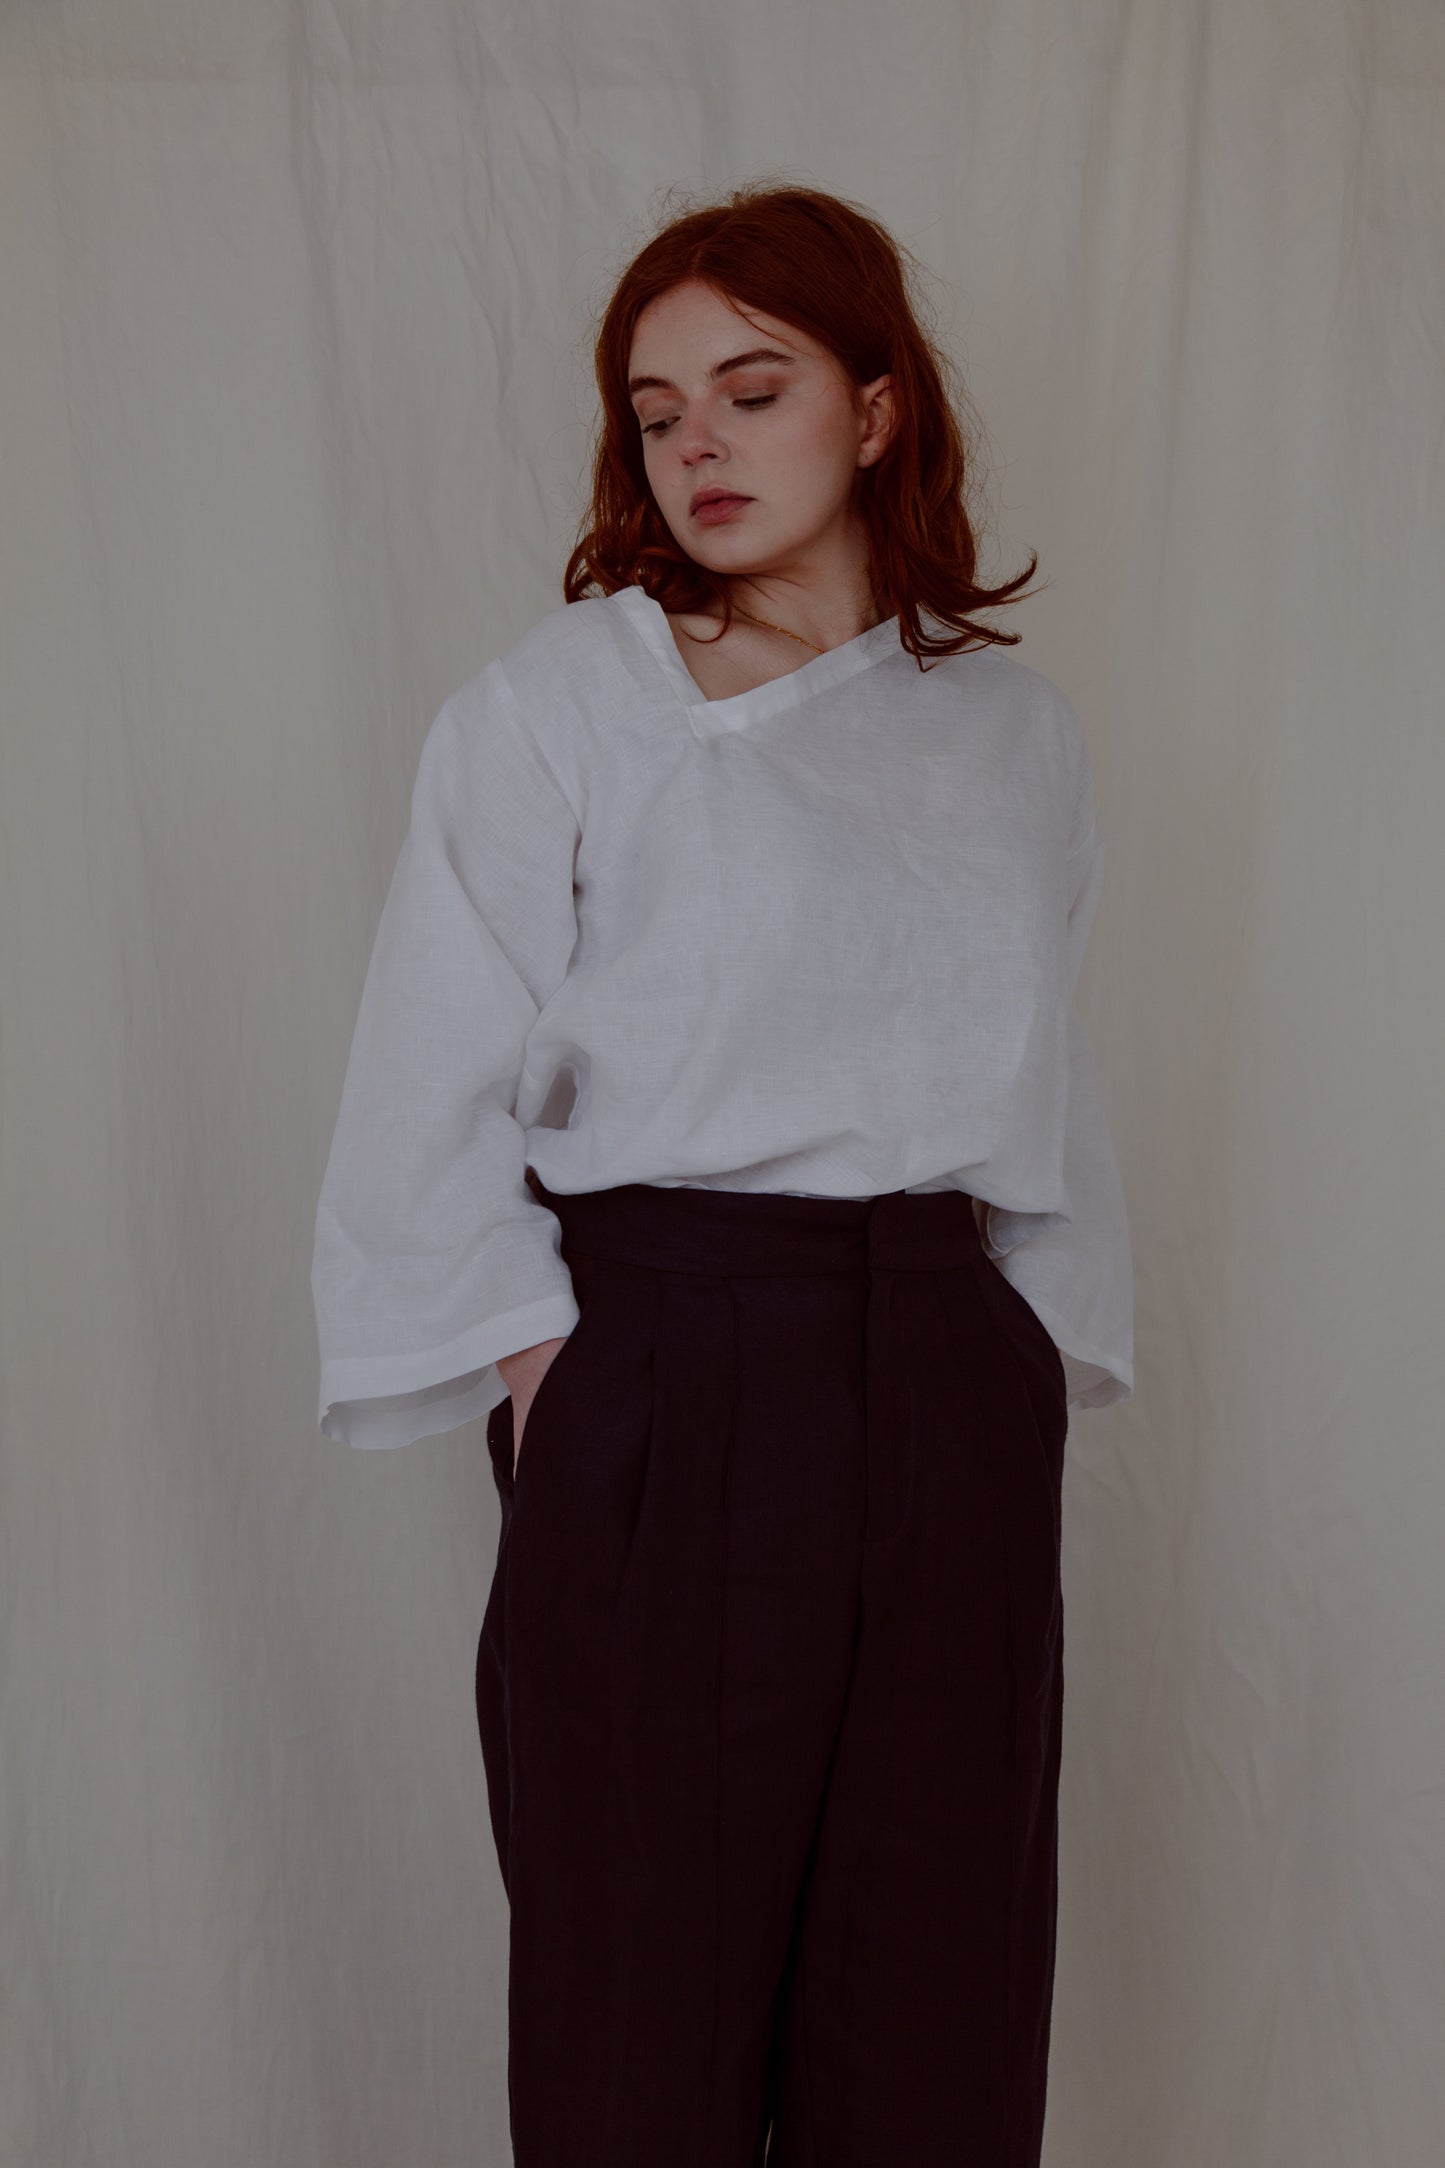 ASYMMETRIC TEE | An update on our best selling staple- the kind tee. This one features a flattering assymetric neckline detail that makes it a little more special than your average white tee, yet really wearable and easy to dress up or down. Wear with our